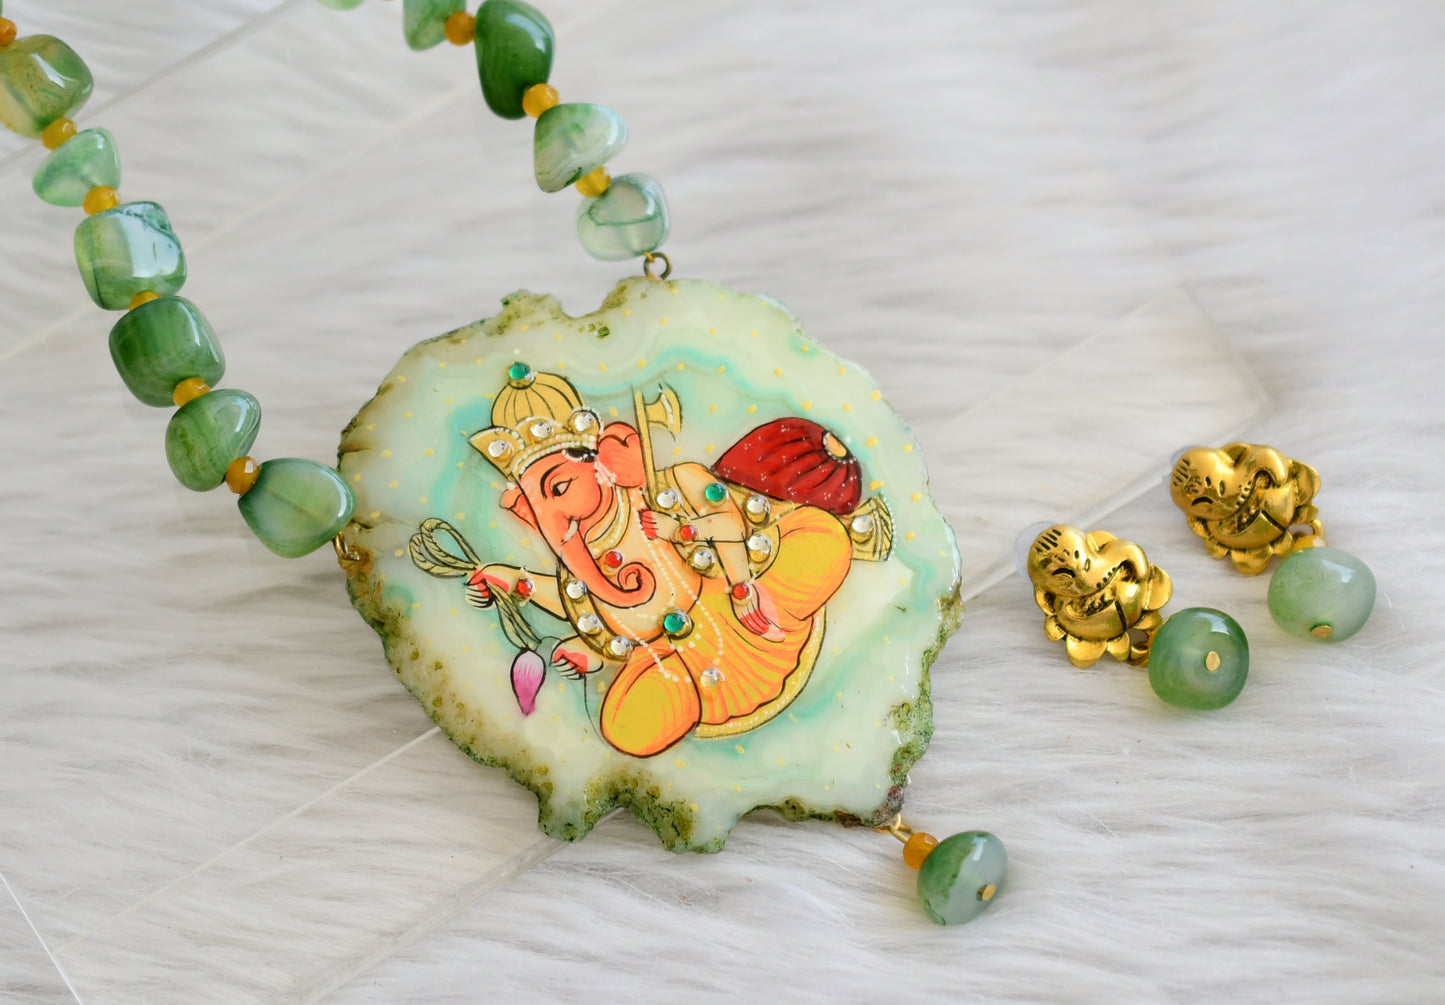 Hand painted ganesha sliced agate pendant with green-yellow onyx beads necklace set dj-45193